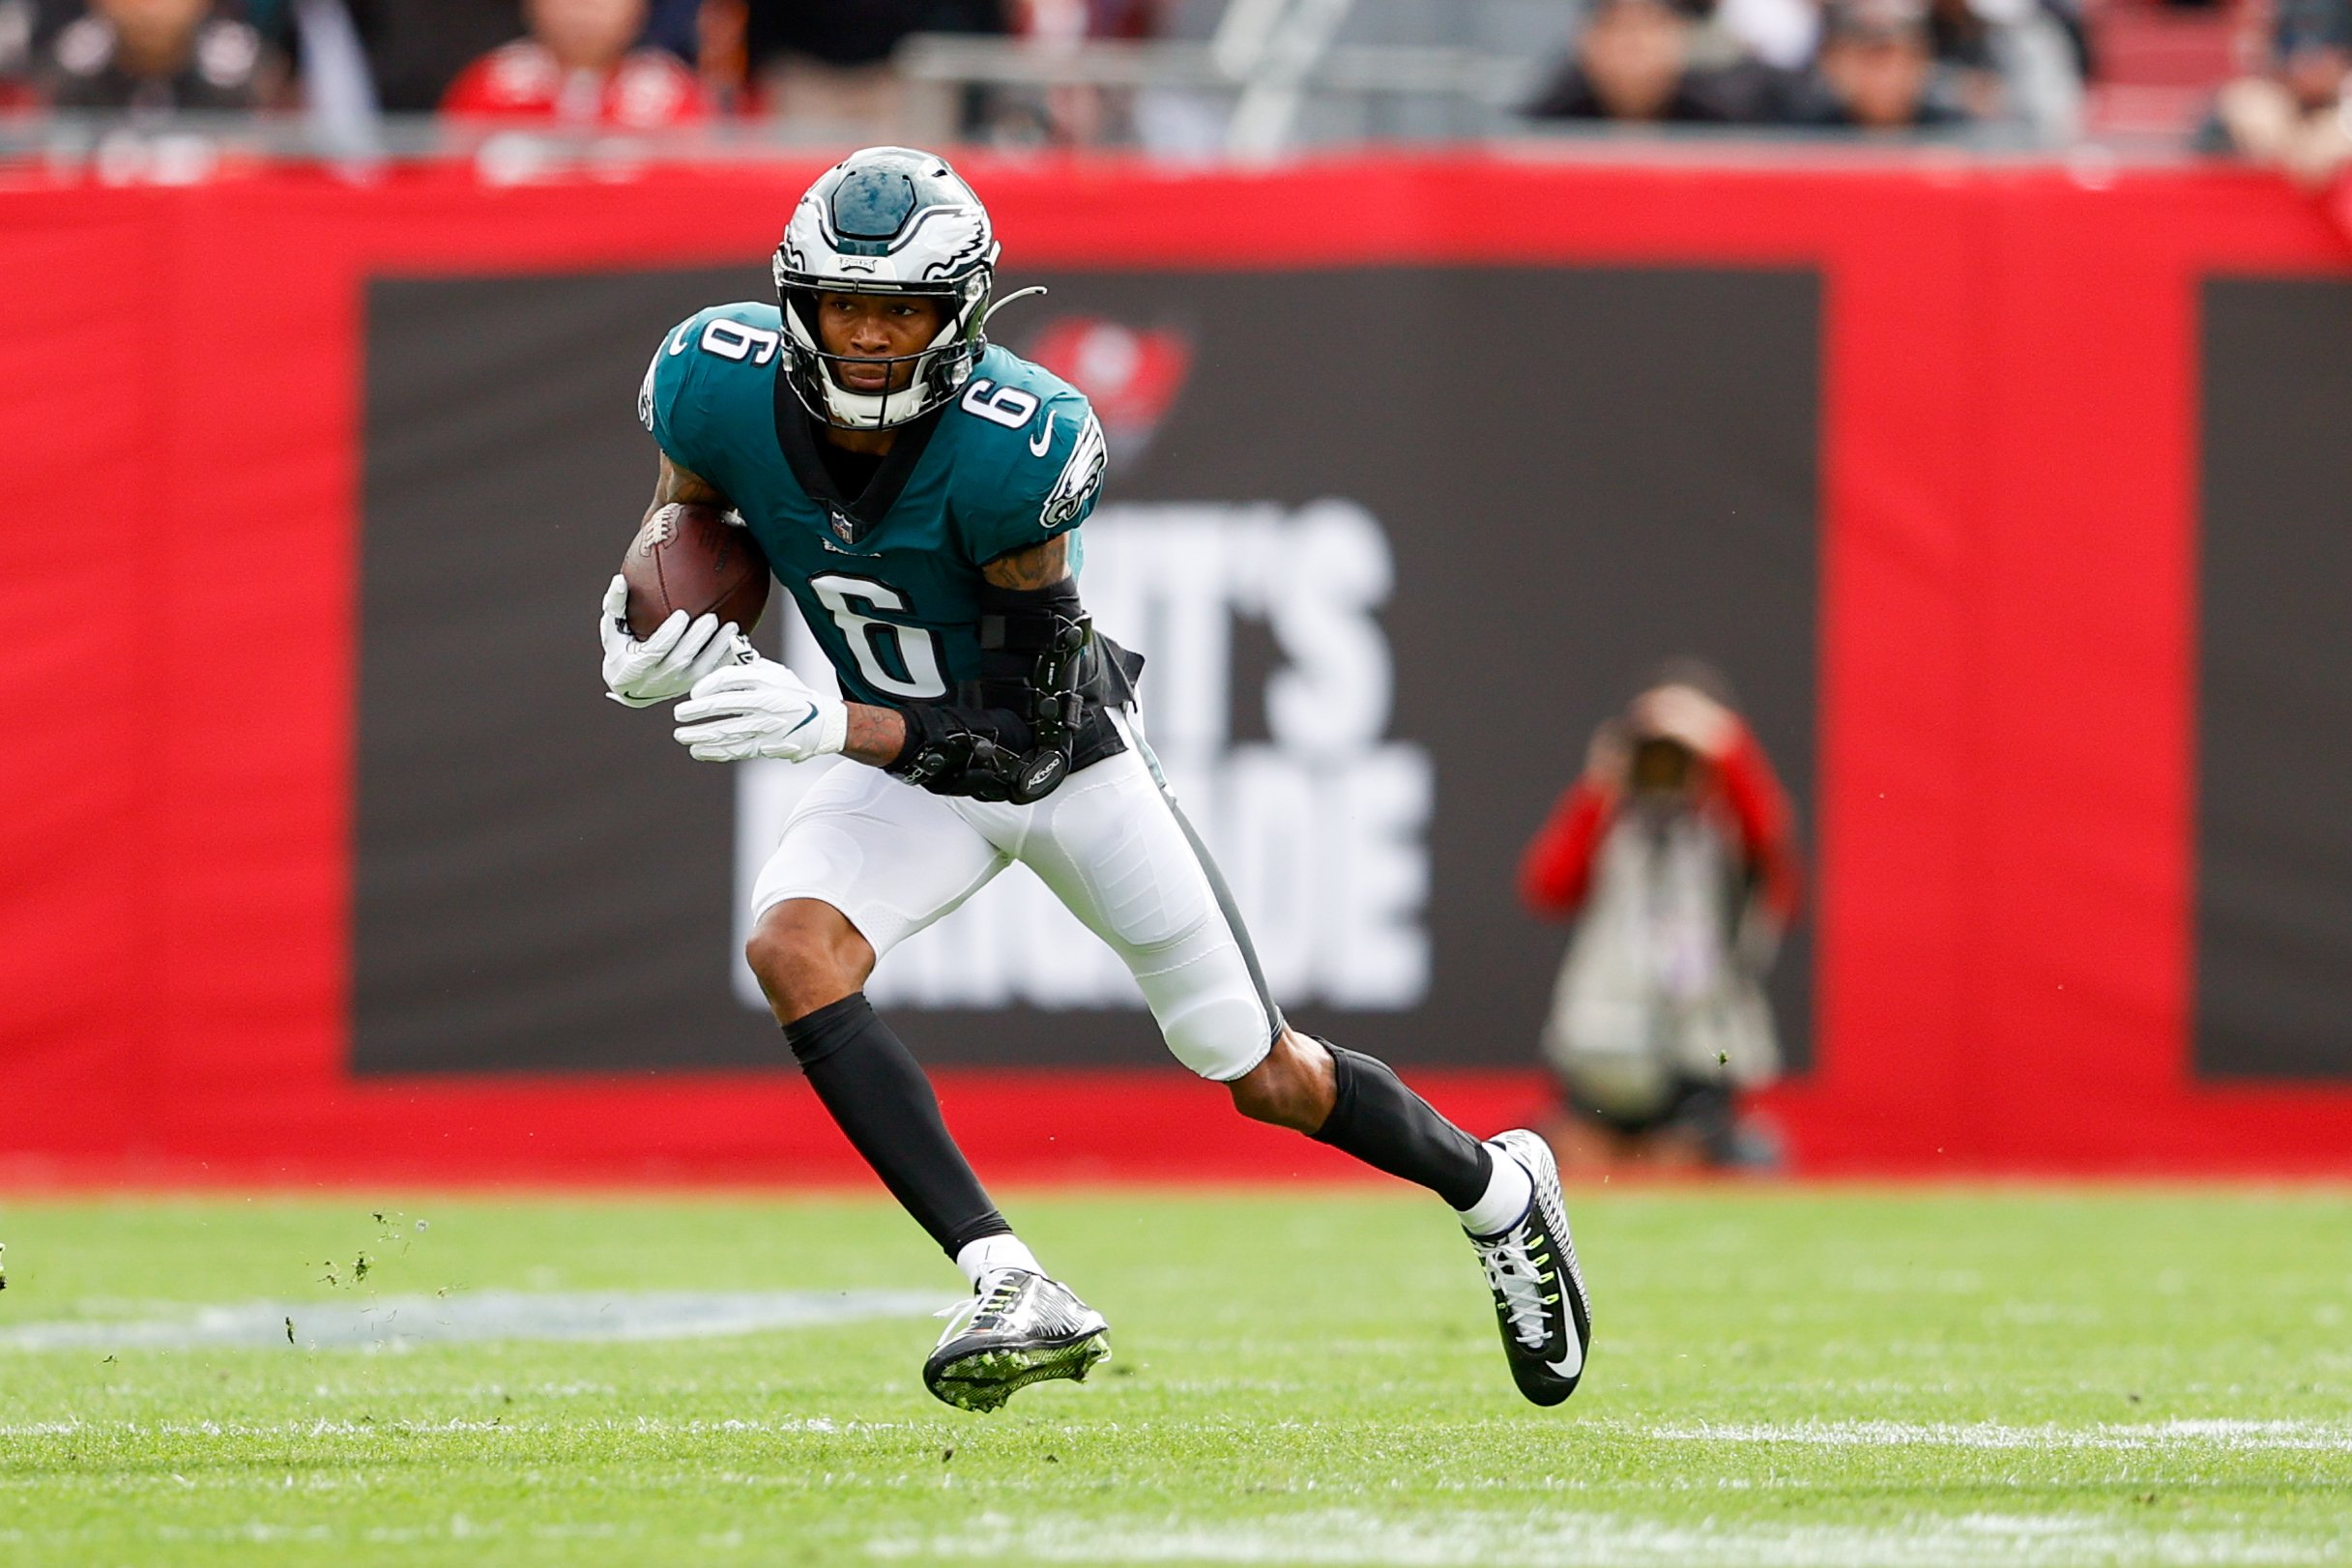 Monday Night Football NFL prop bets include DeVonta Smith, Devin  Singletary, and Robert Woods